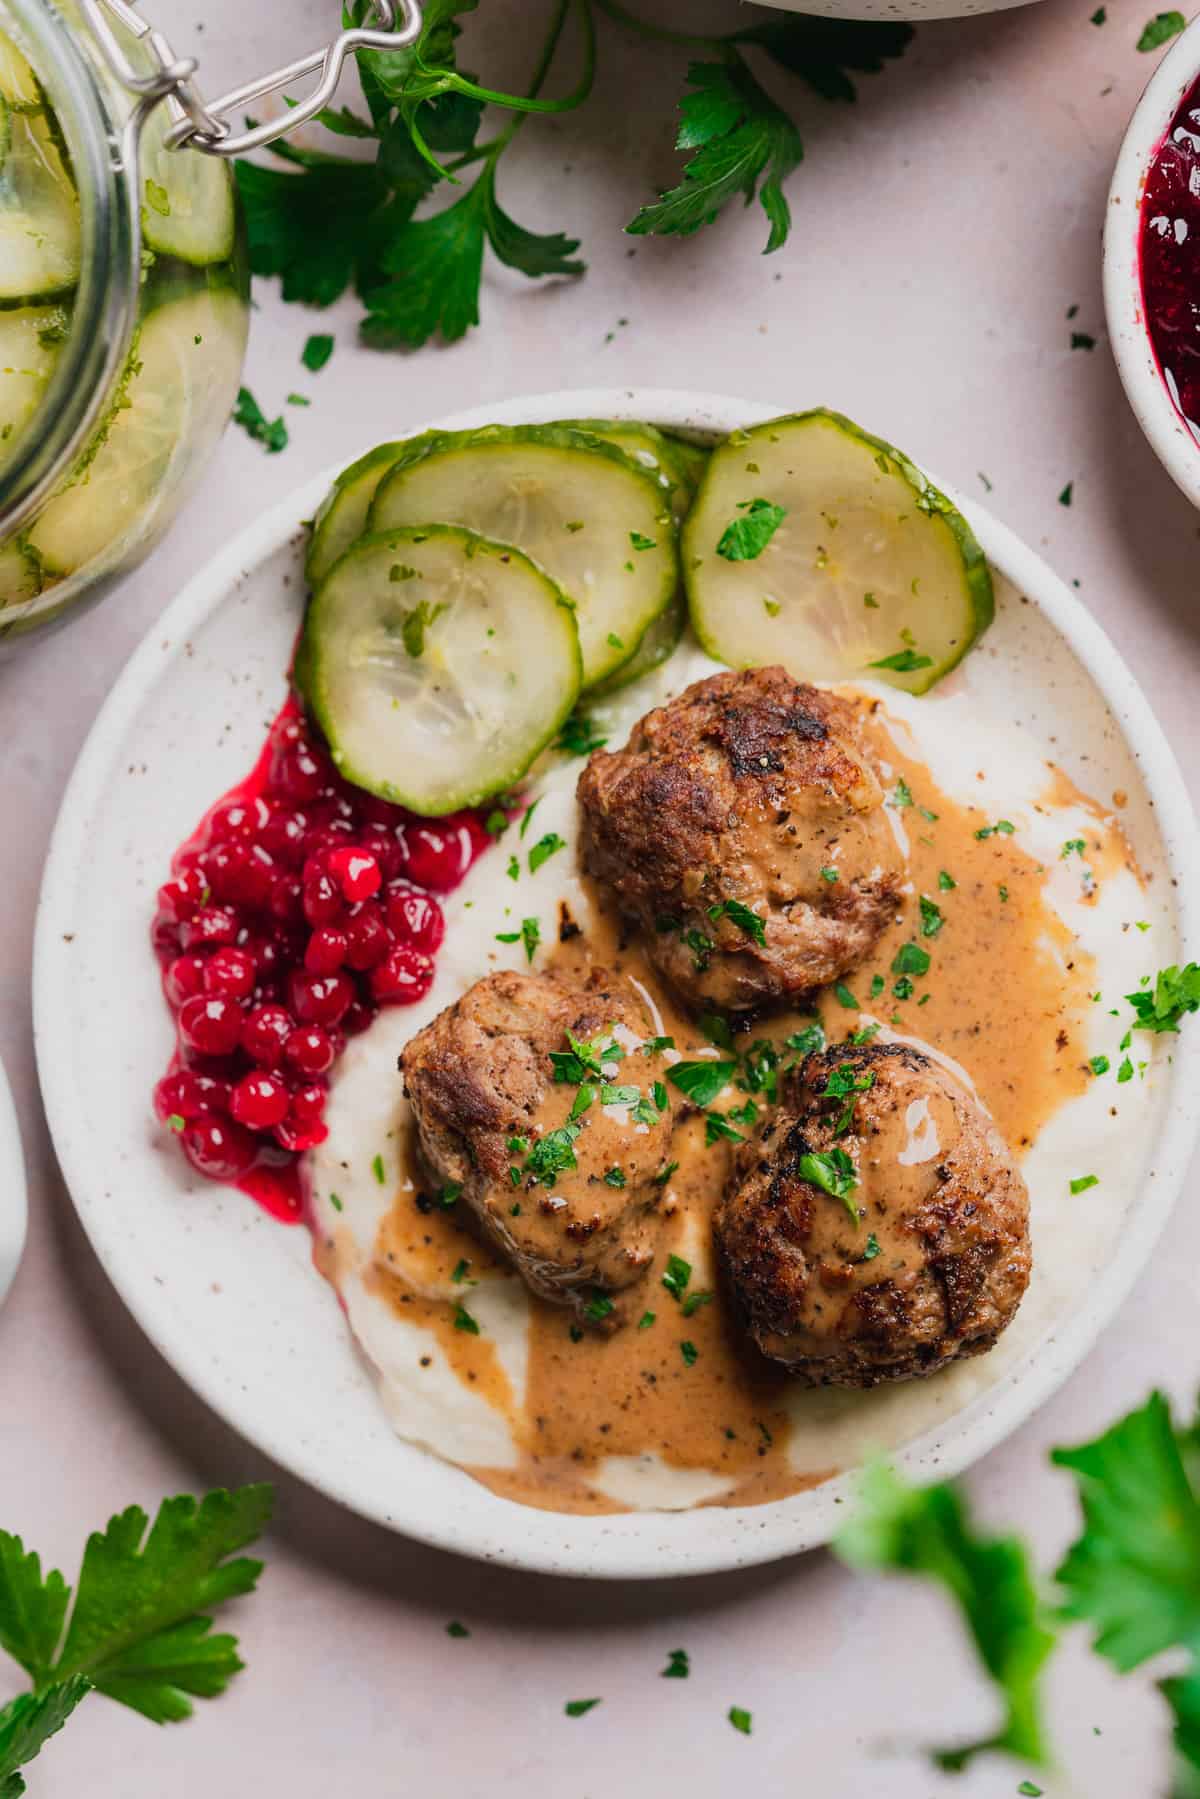 plate of swedish meatballs and gravy with mashed turnips, cucumber salad and lingonberry sauce. 